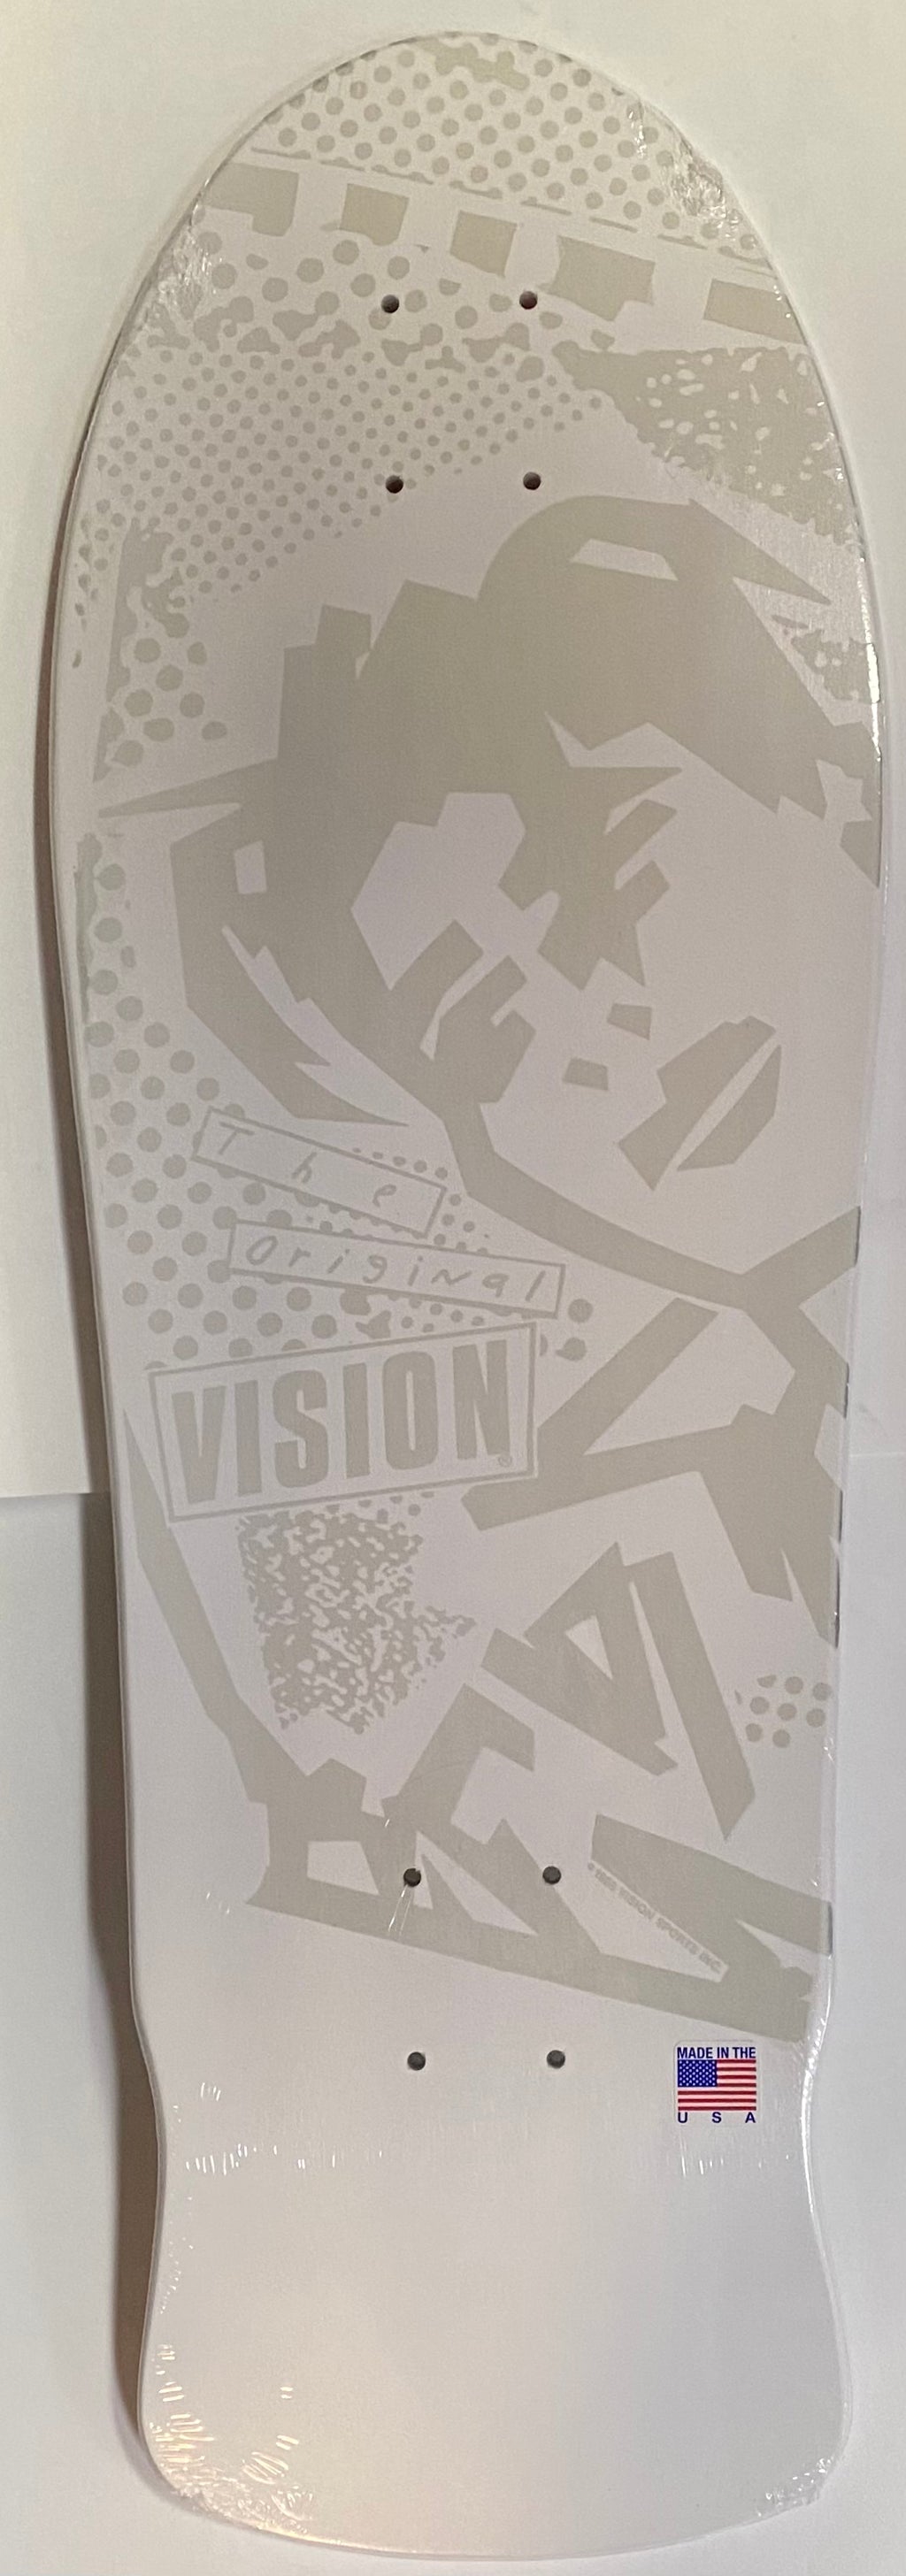 VISION LIMITED WINTER VISION ORIGINAL MG HAND SCREENED DECK -WHITE OUT